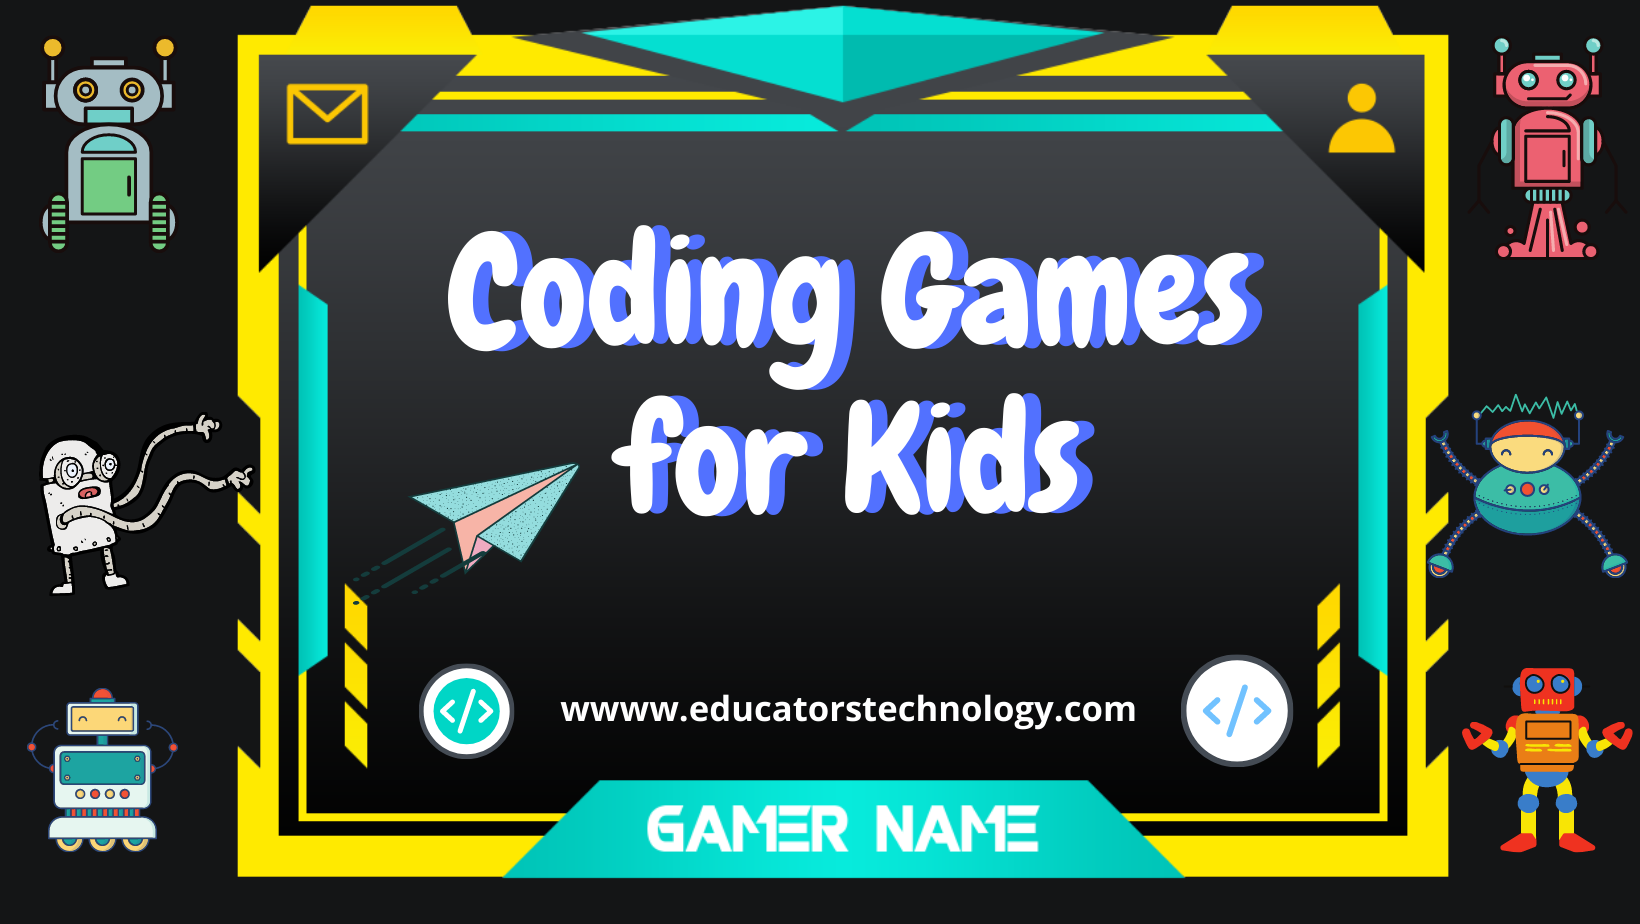 10 Python Games for Kids to Code